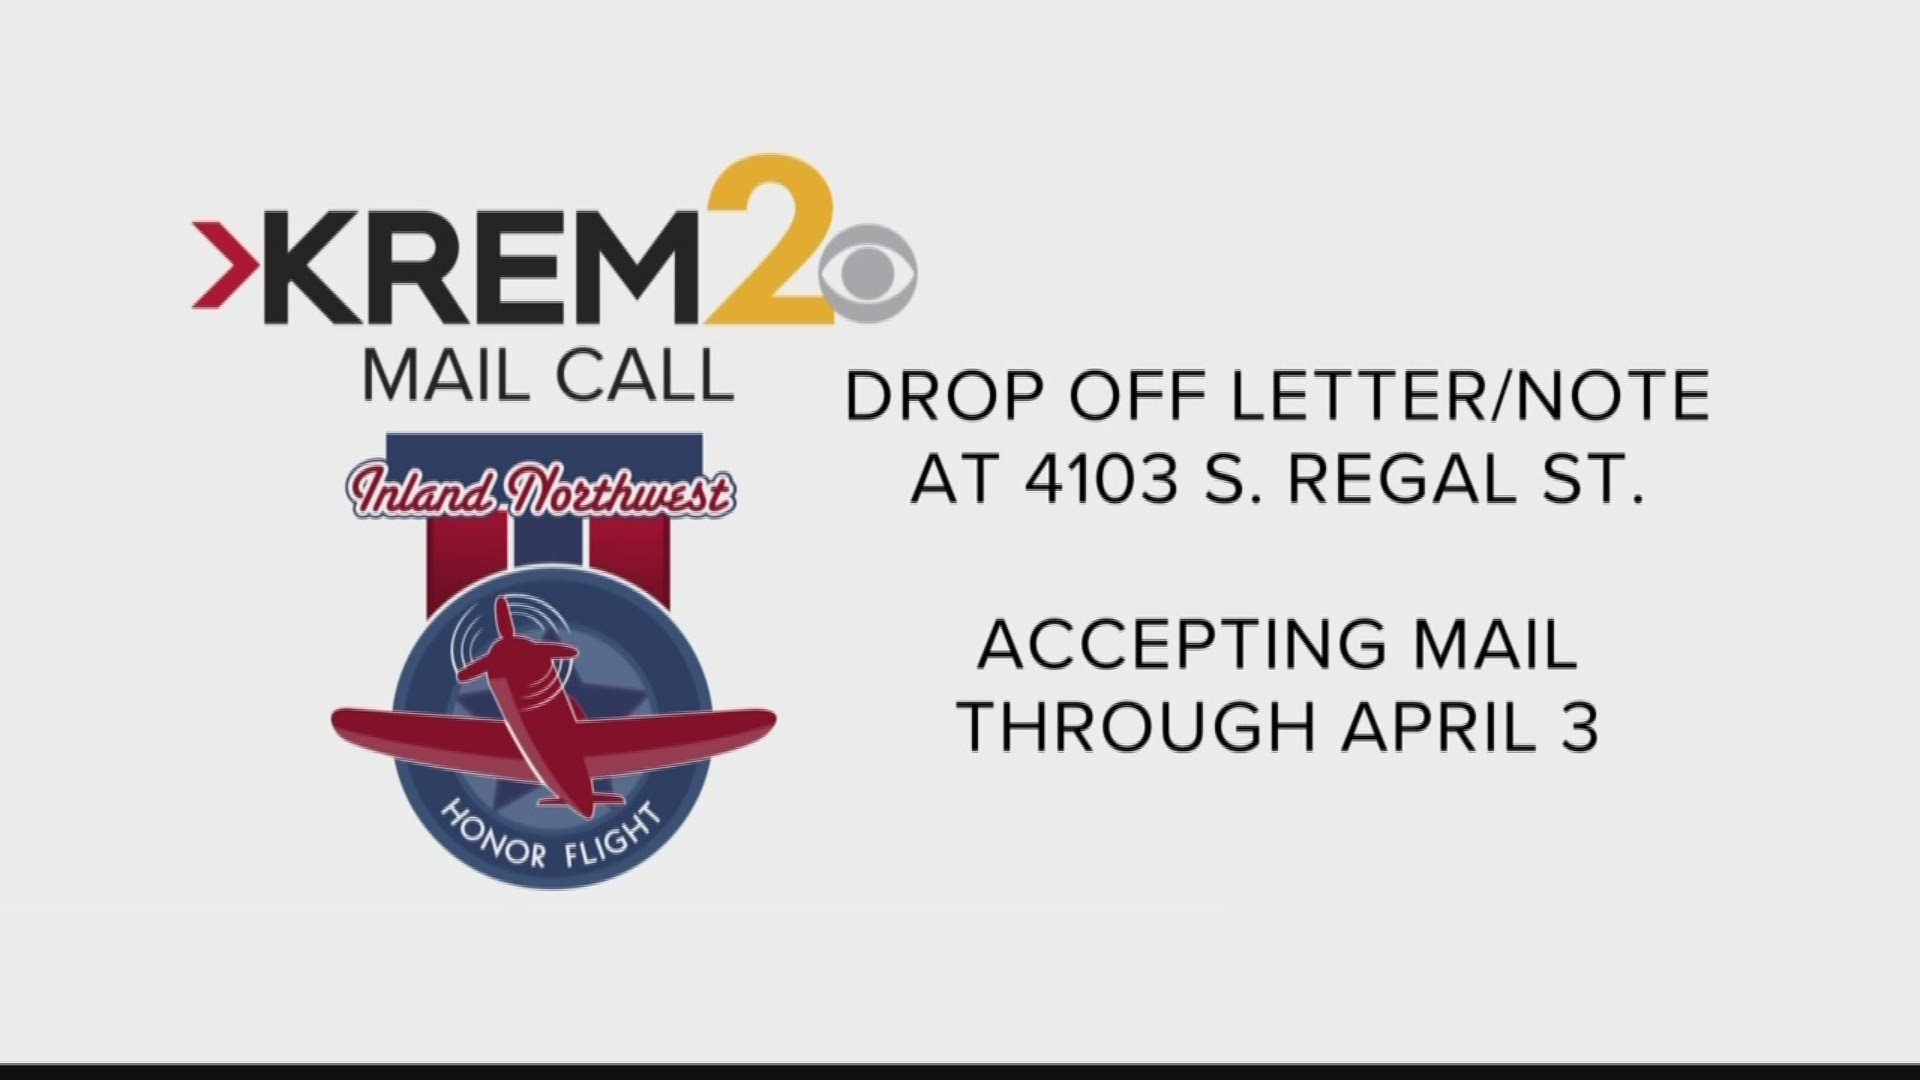 KREM 2 is hosting its own "Mail Call" so each of our veterans can receive a package, even though April's Honor Flight is canceled.